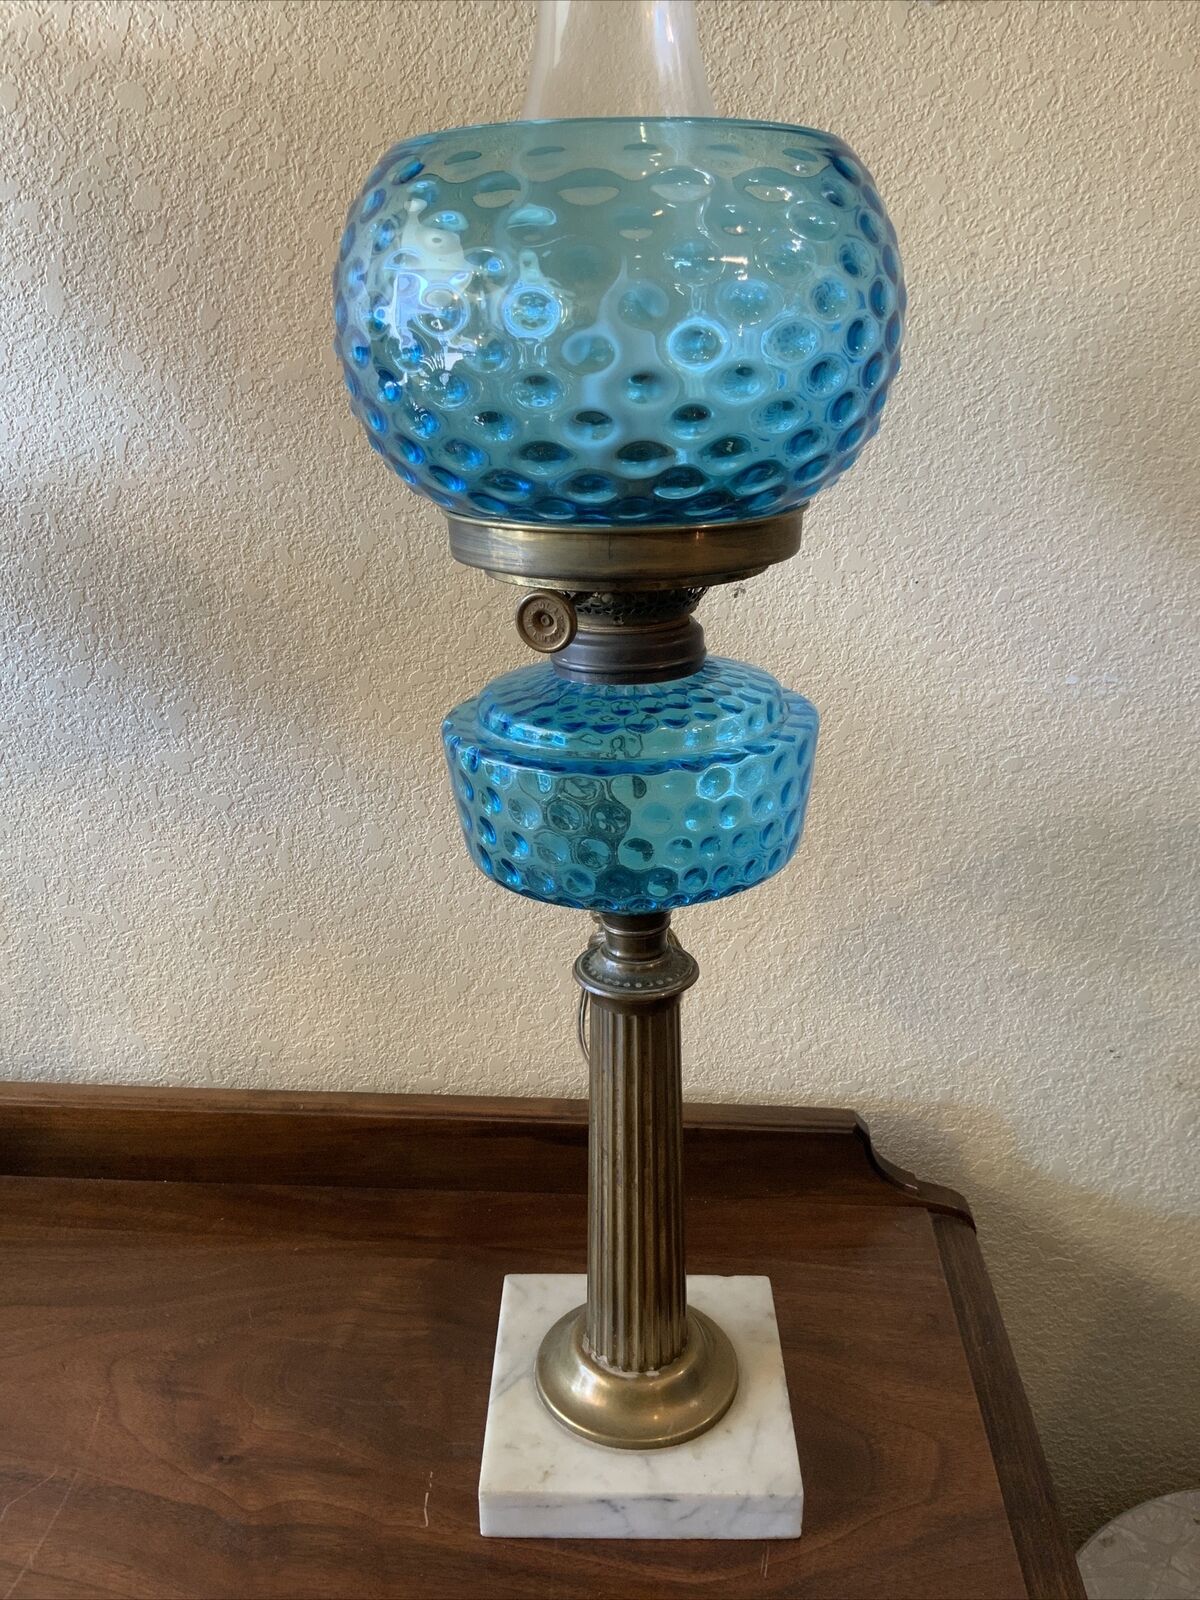 VINTAGE Antique Oil TABLE LAMP GWTW BANQUET Parlor GLASS W/ SHADE Blue Coin Dot